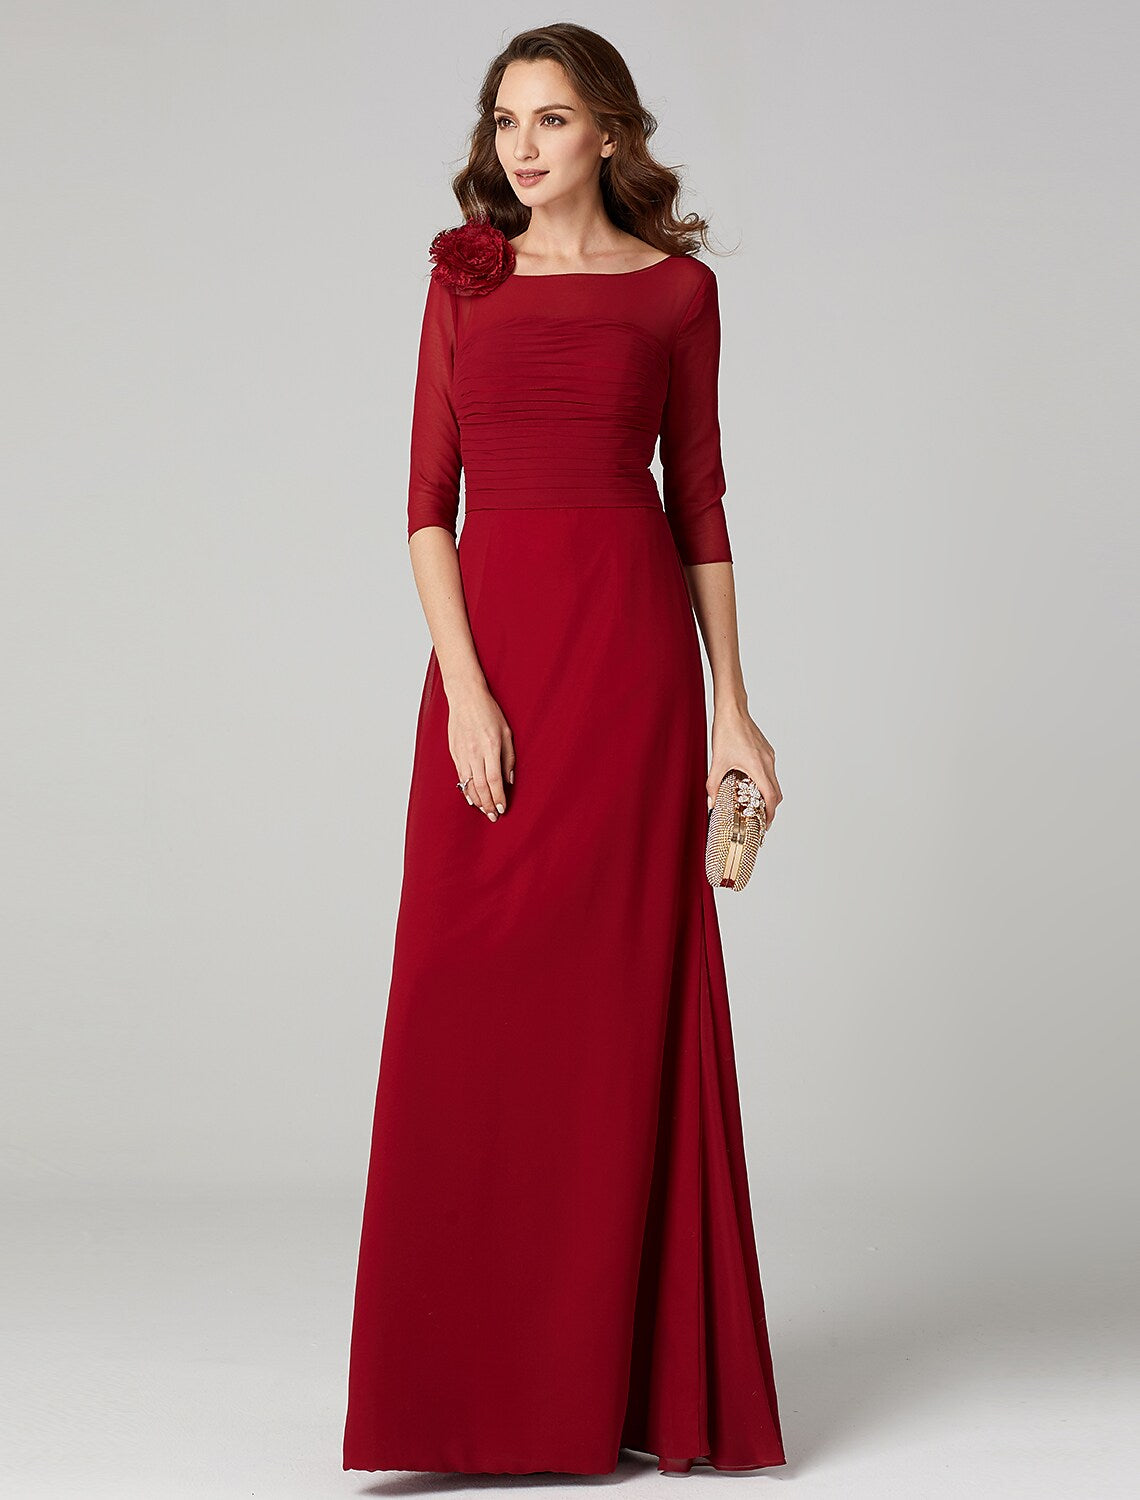 Dress Floor Length Length Sleeve Neck Charmeuse with Ruched Flower